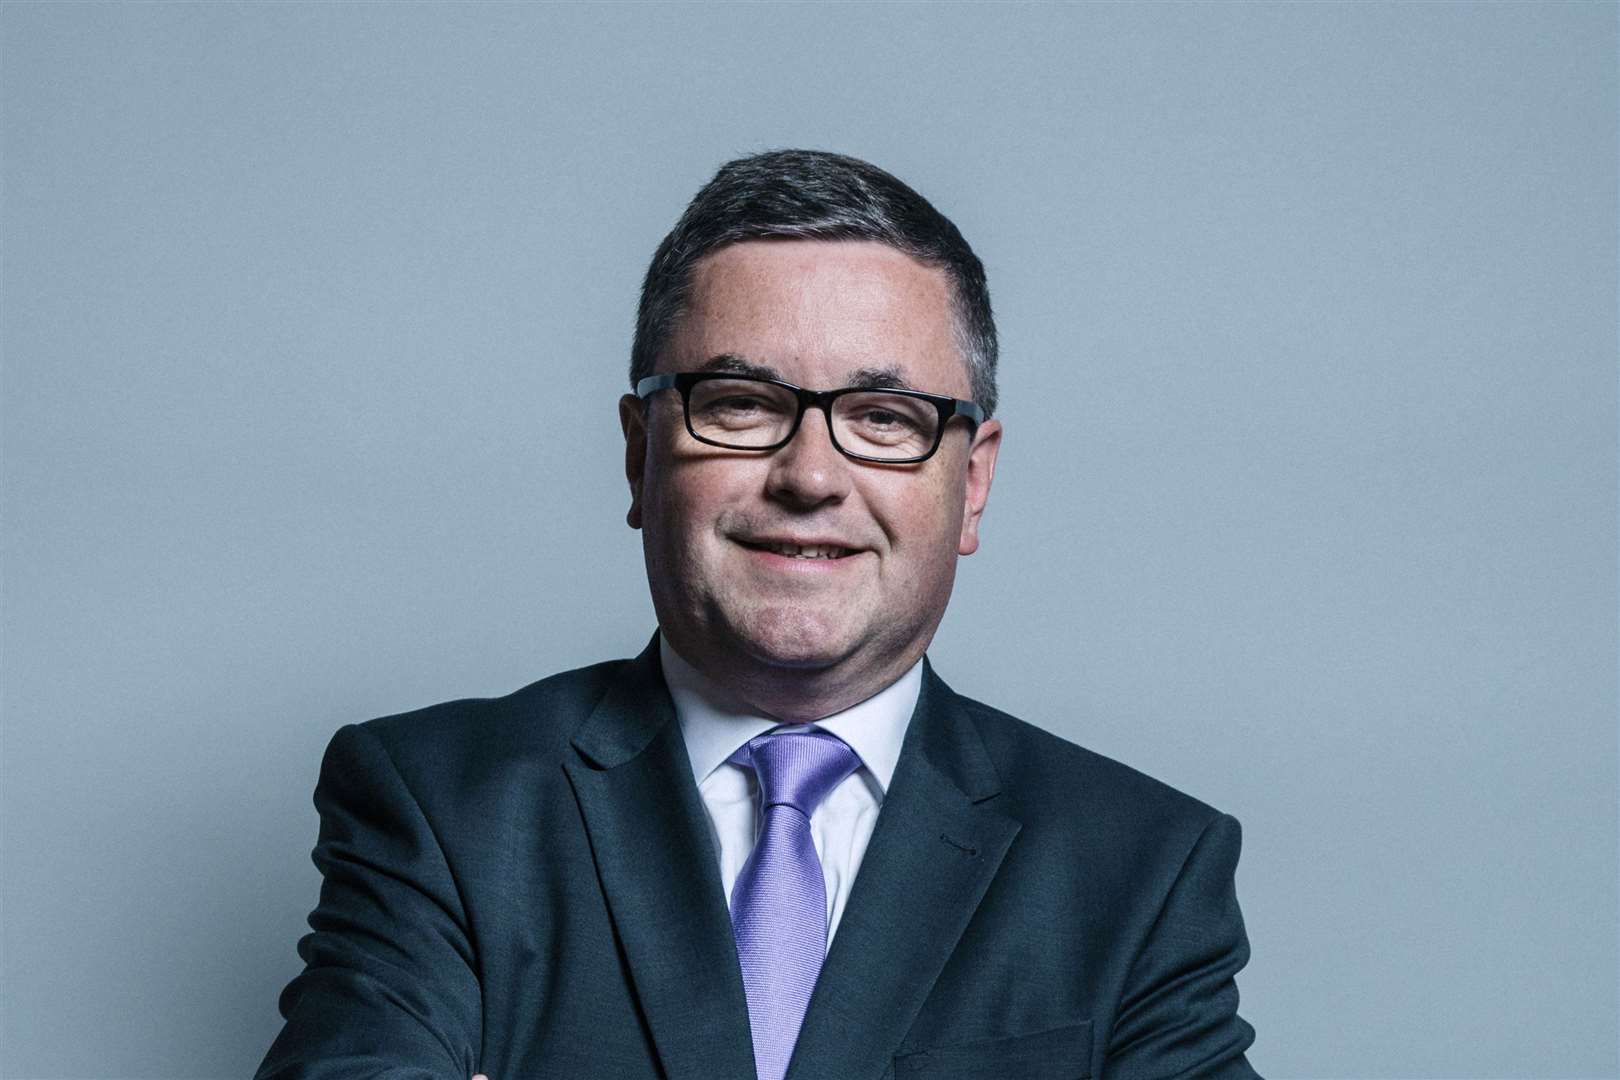 Lord Chancellor.Robert Buckland: "Our reforms will ensure that appeals are heard fairly but not repeatedly." Picture: UK Parliament official portraits